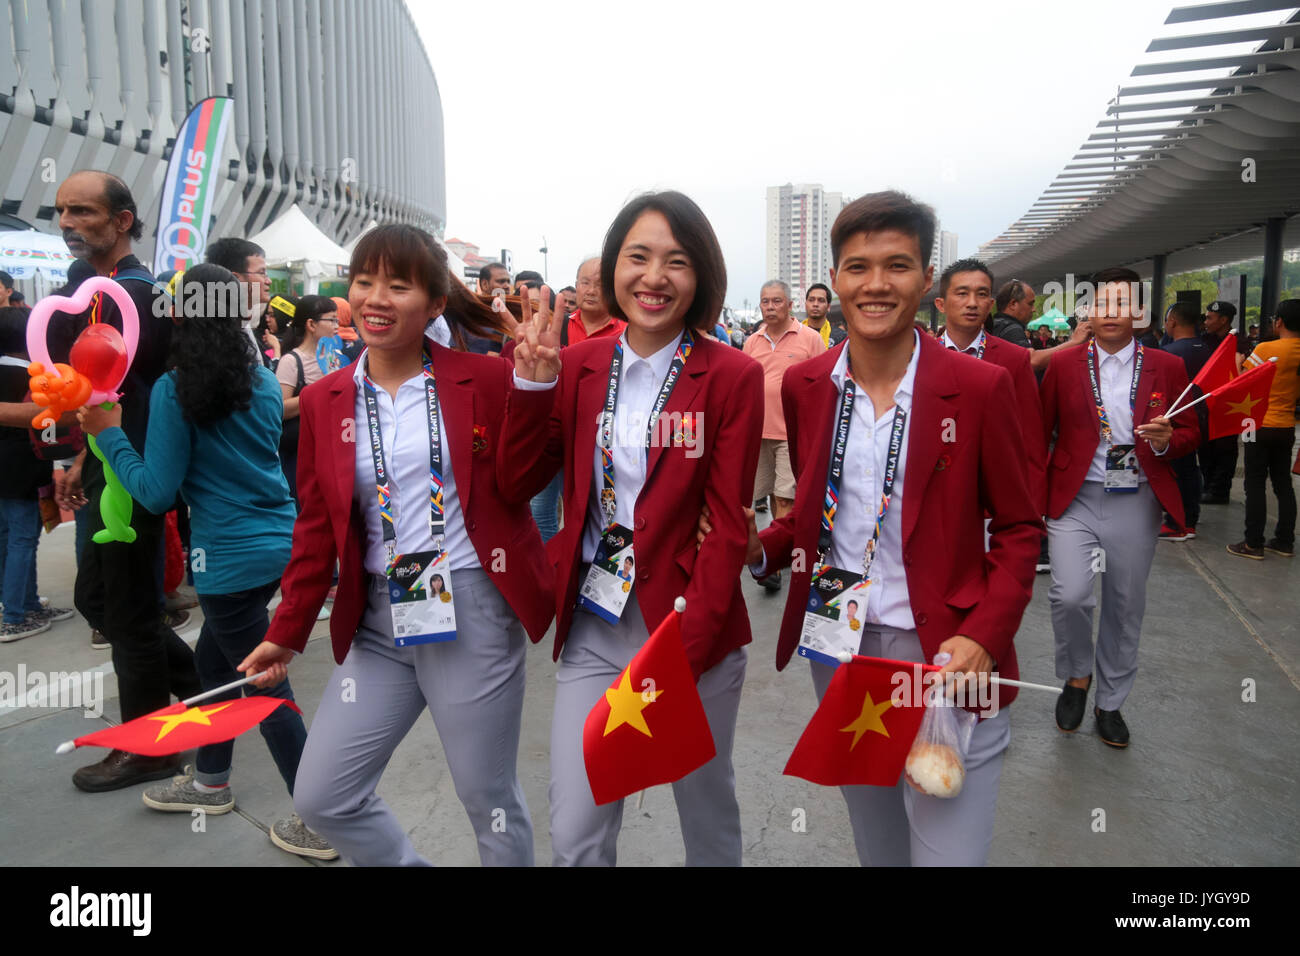 Vietnam officers group outside the national stadium during the opening ceremony of 29th SEA games. Credit: Calvin Chan/Alamy Live News Stock Photo